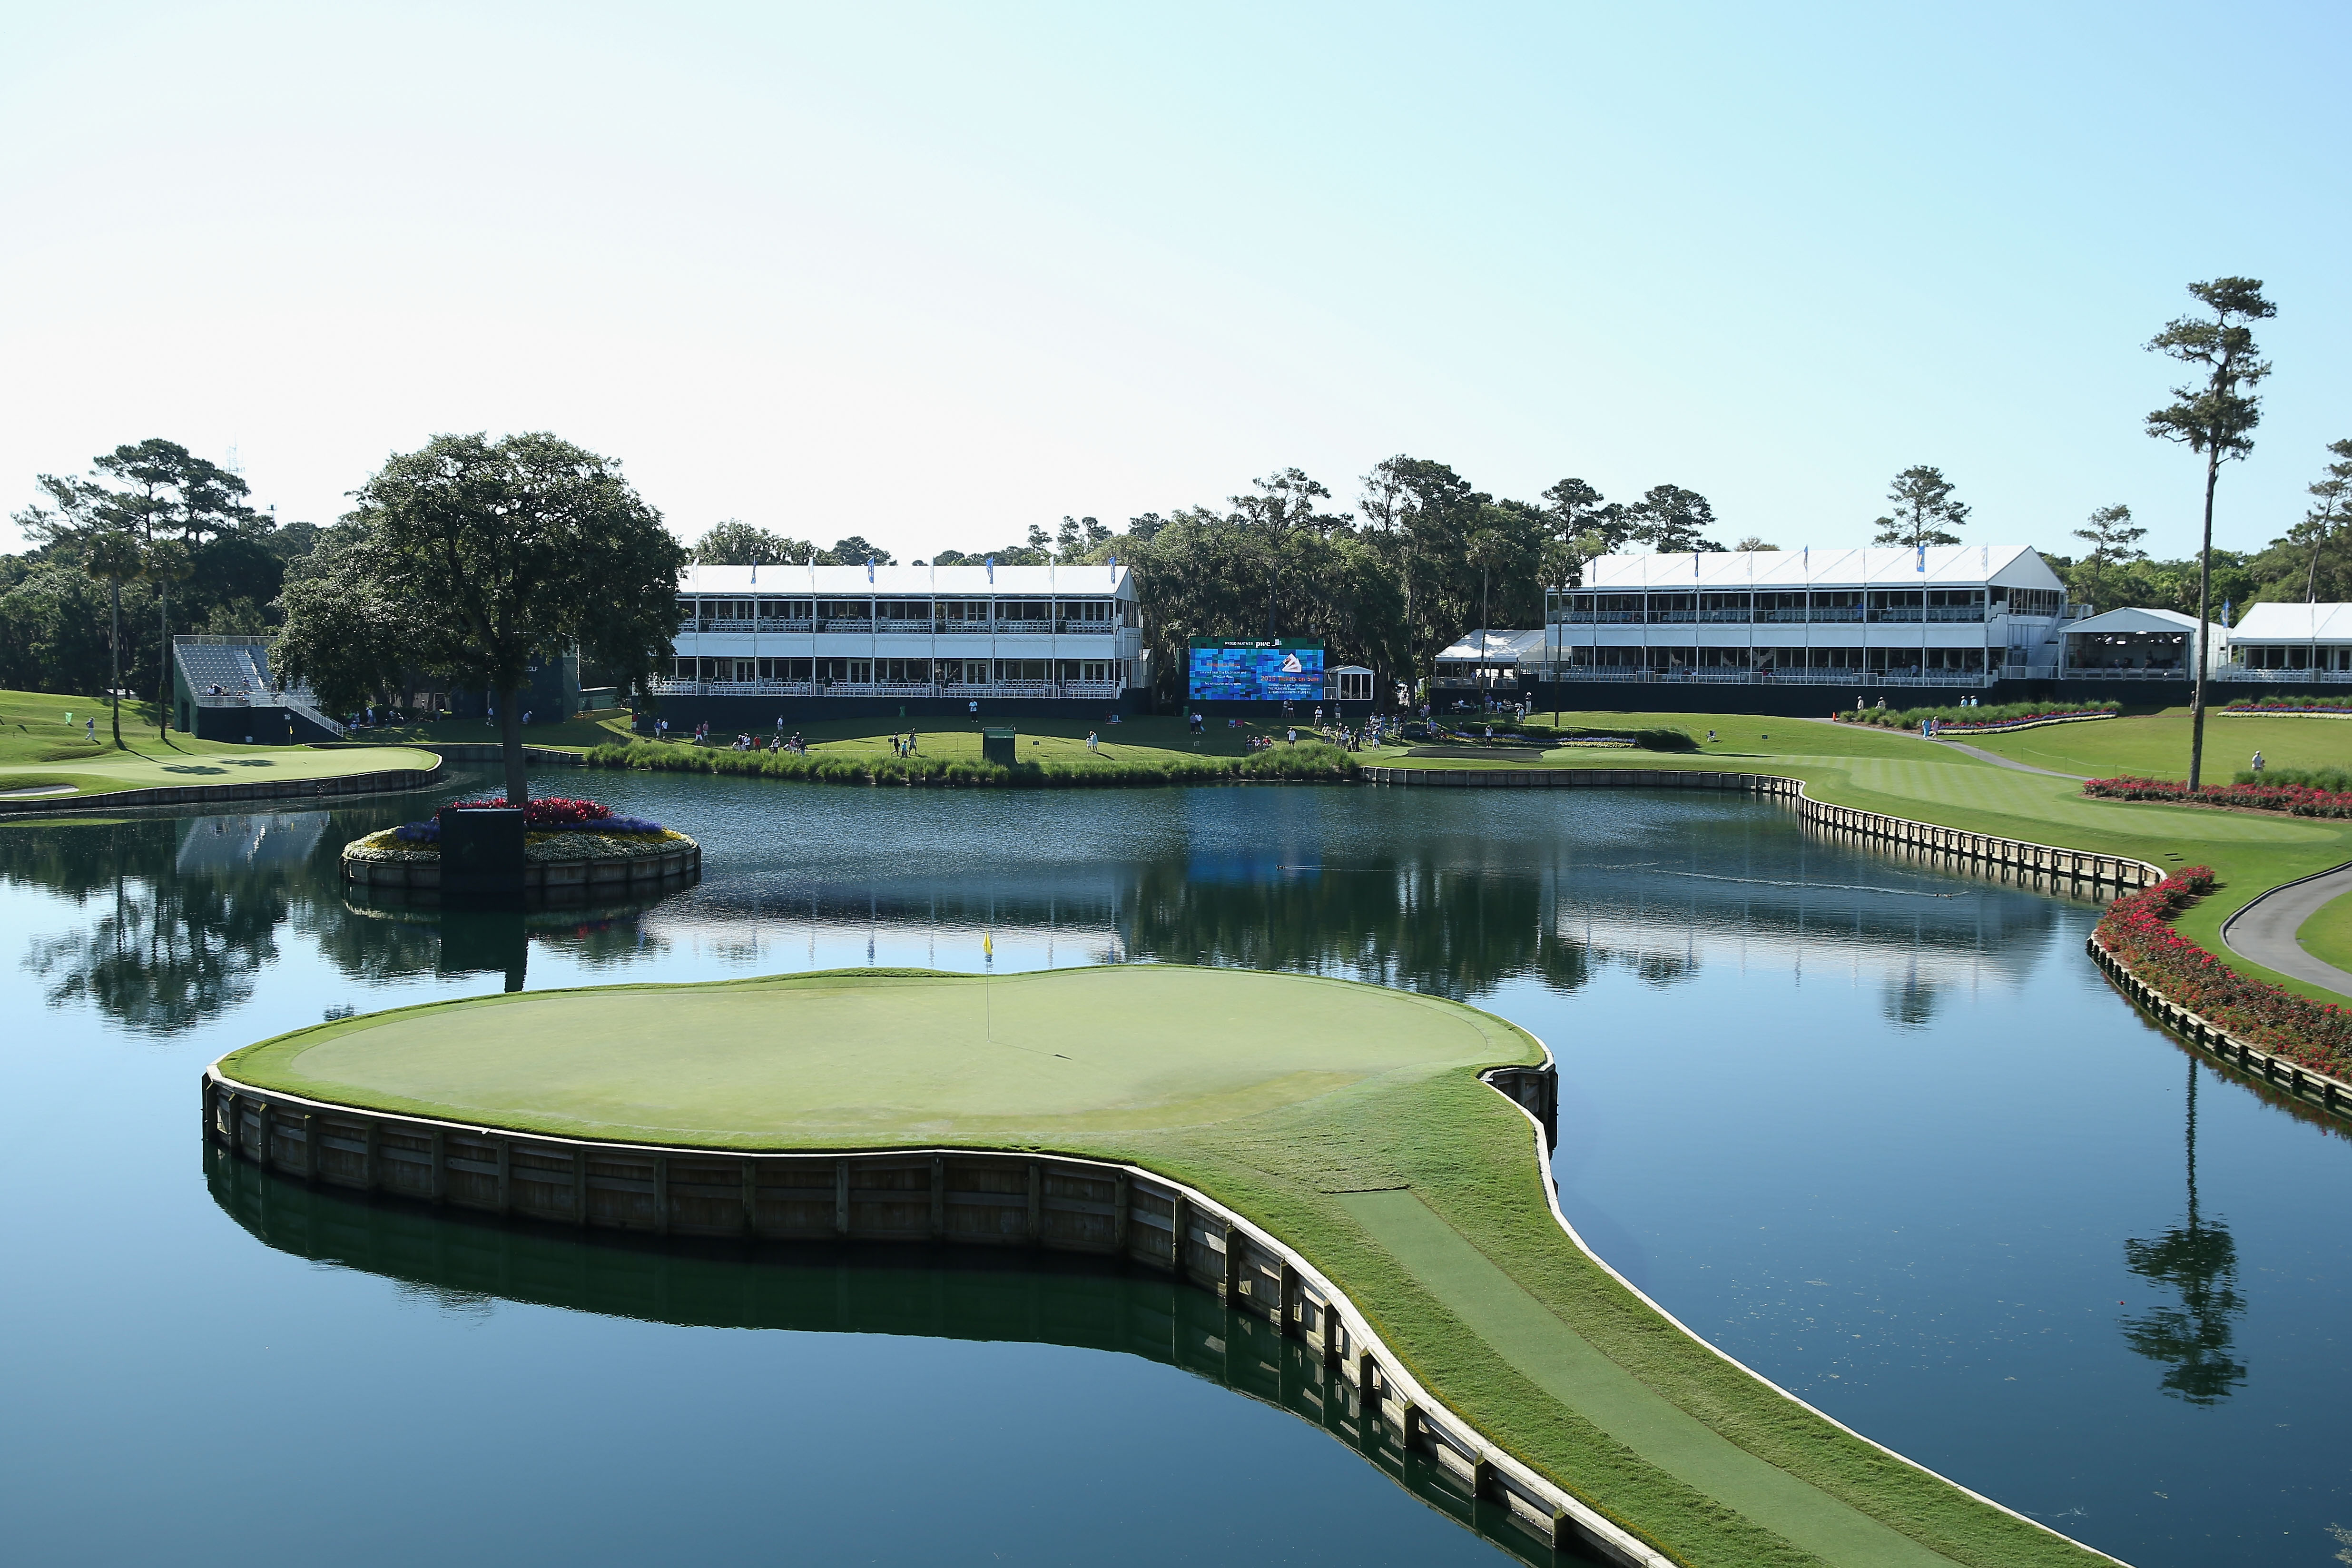 Hear a splash, there goes the cash - Sawgrass's infamous 17th (Photo: Getty Images)